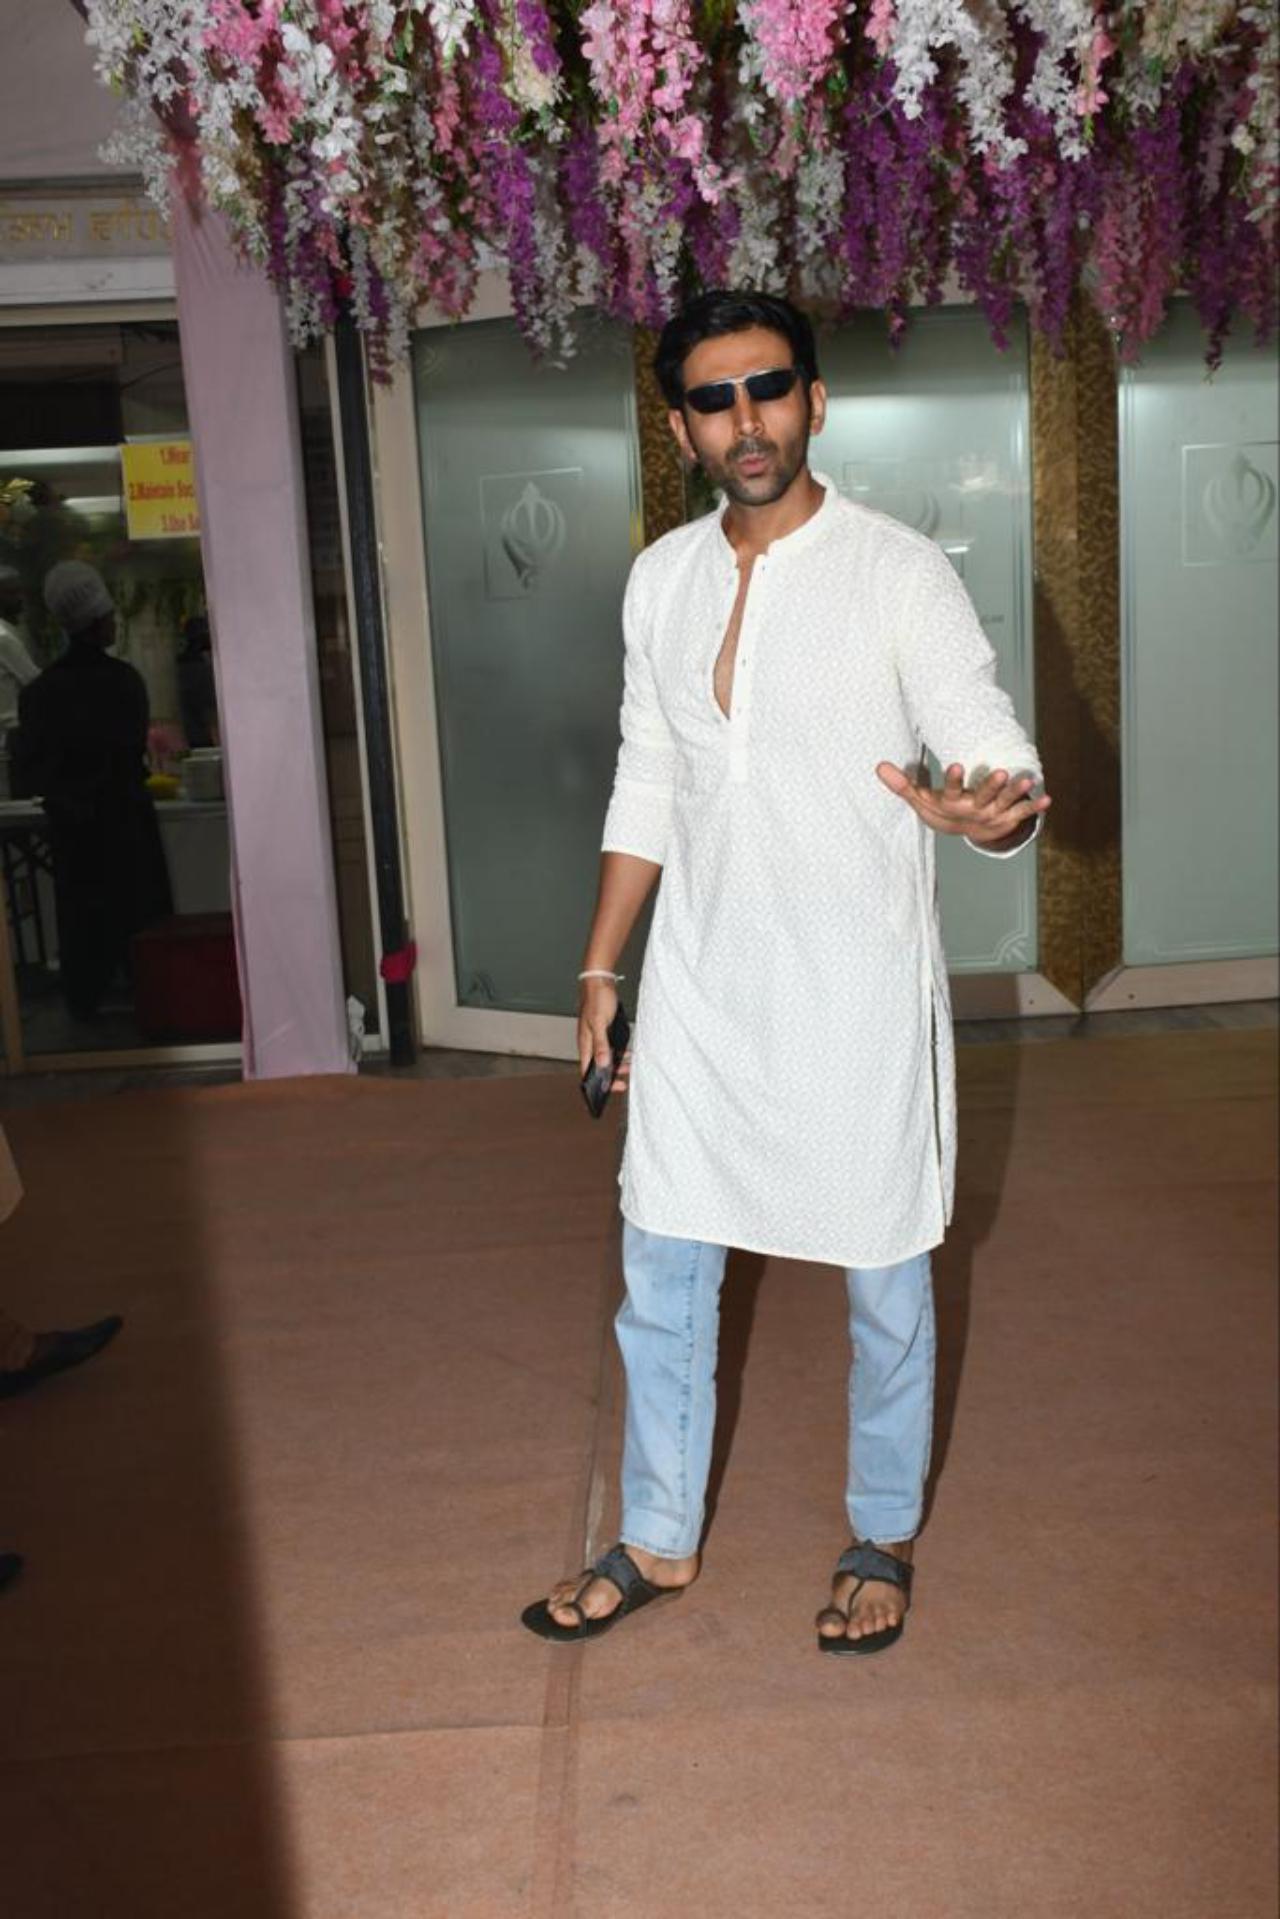 Kartik Aaryan was dressed rather casually for the occasion, wearing a plain white kurta with denims